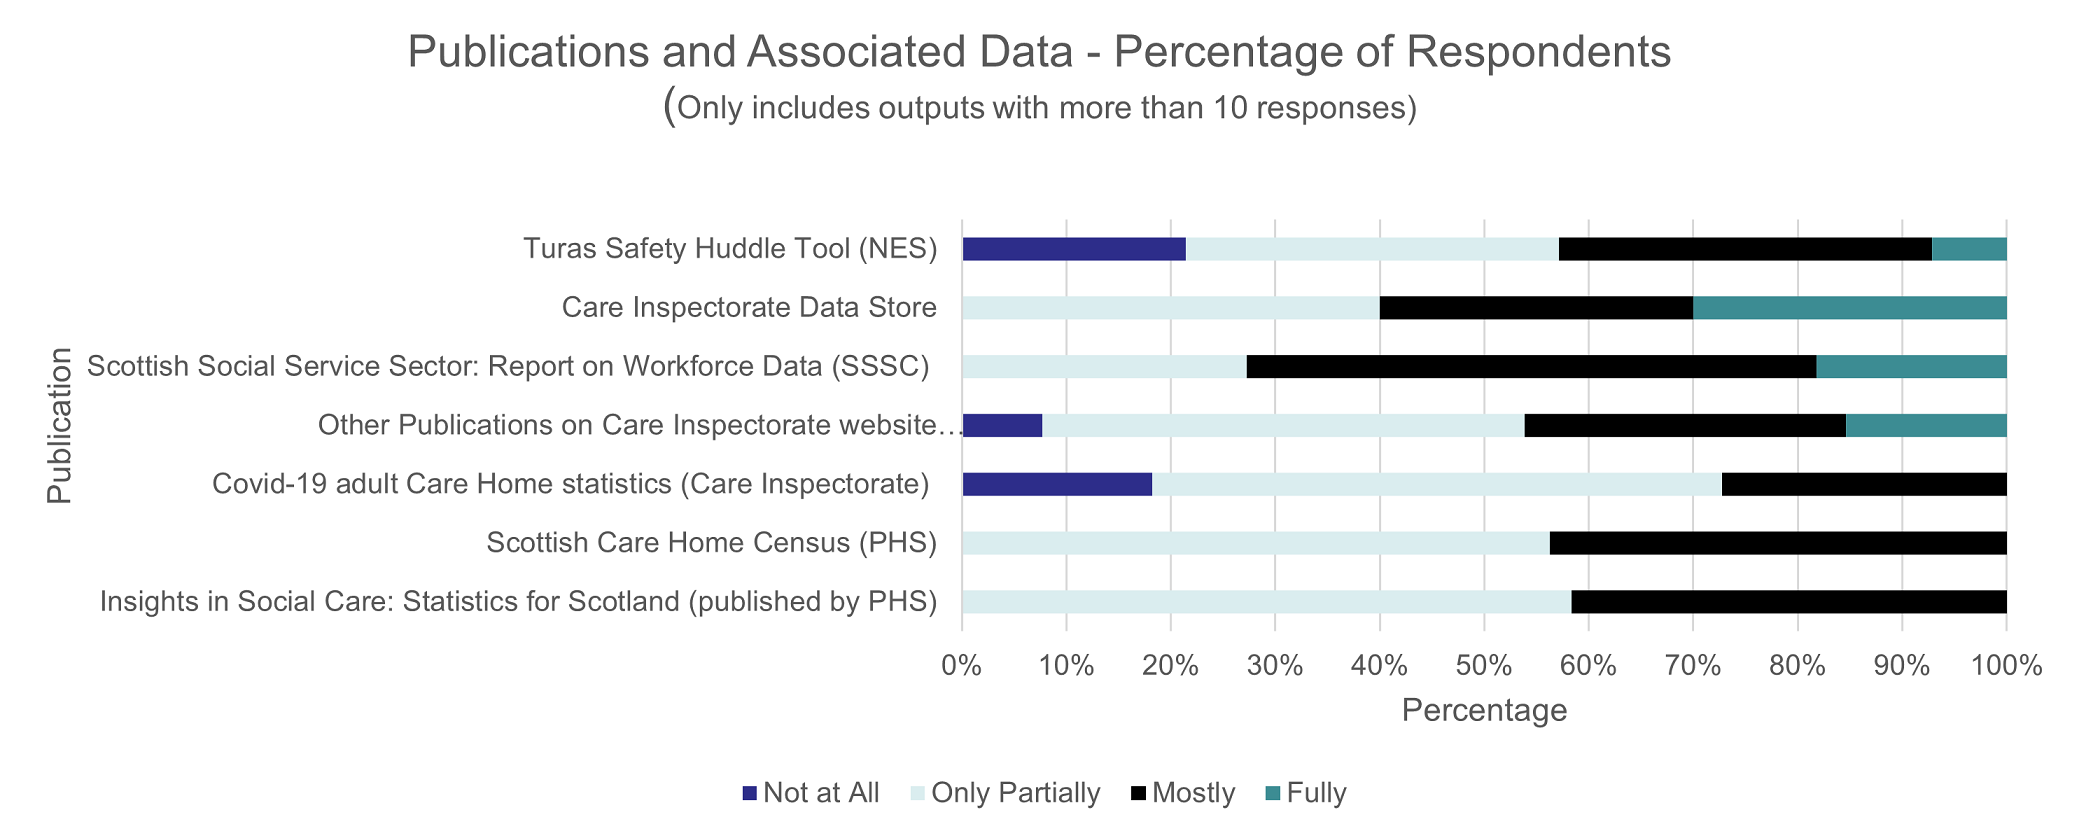 This chart shows the respondents ranking of whether publications and associated datasets met the respondents needs. The percentage of respondents is shown for each of the 4 categories (Not at all, Only Partially, Mostly and Fully). The chart excludes any cases in which the output had less than 10 responses.